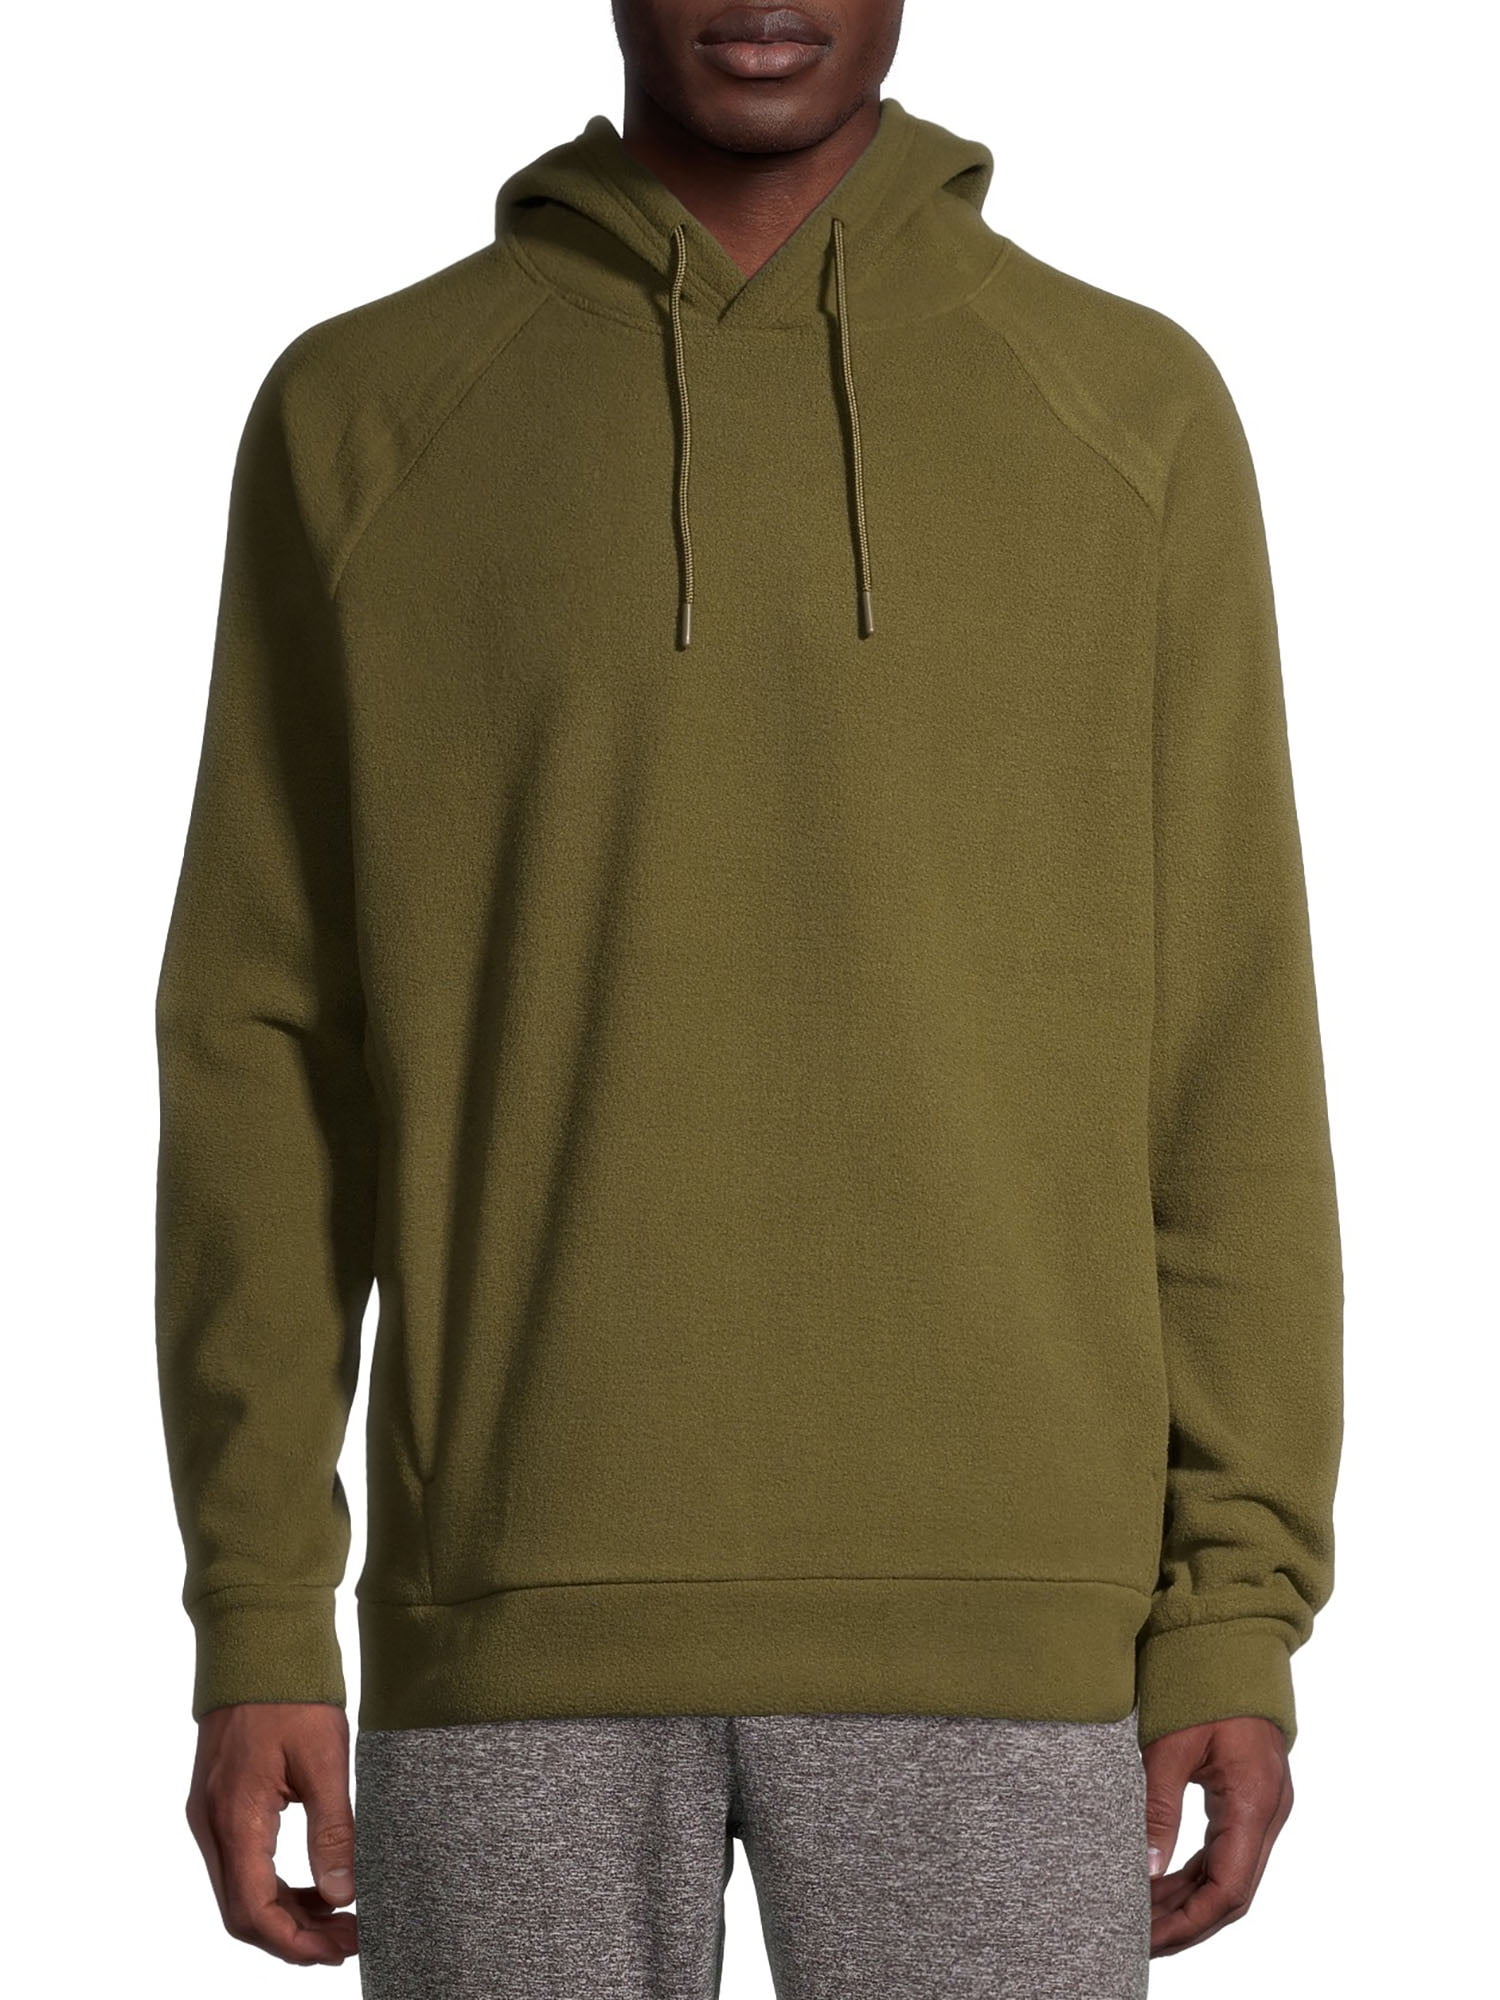 Athletic Works Relaxed fit Pullover Hoodie (Men's) - Walmart.com